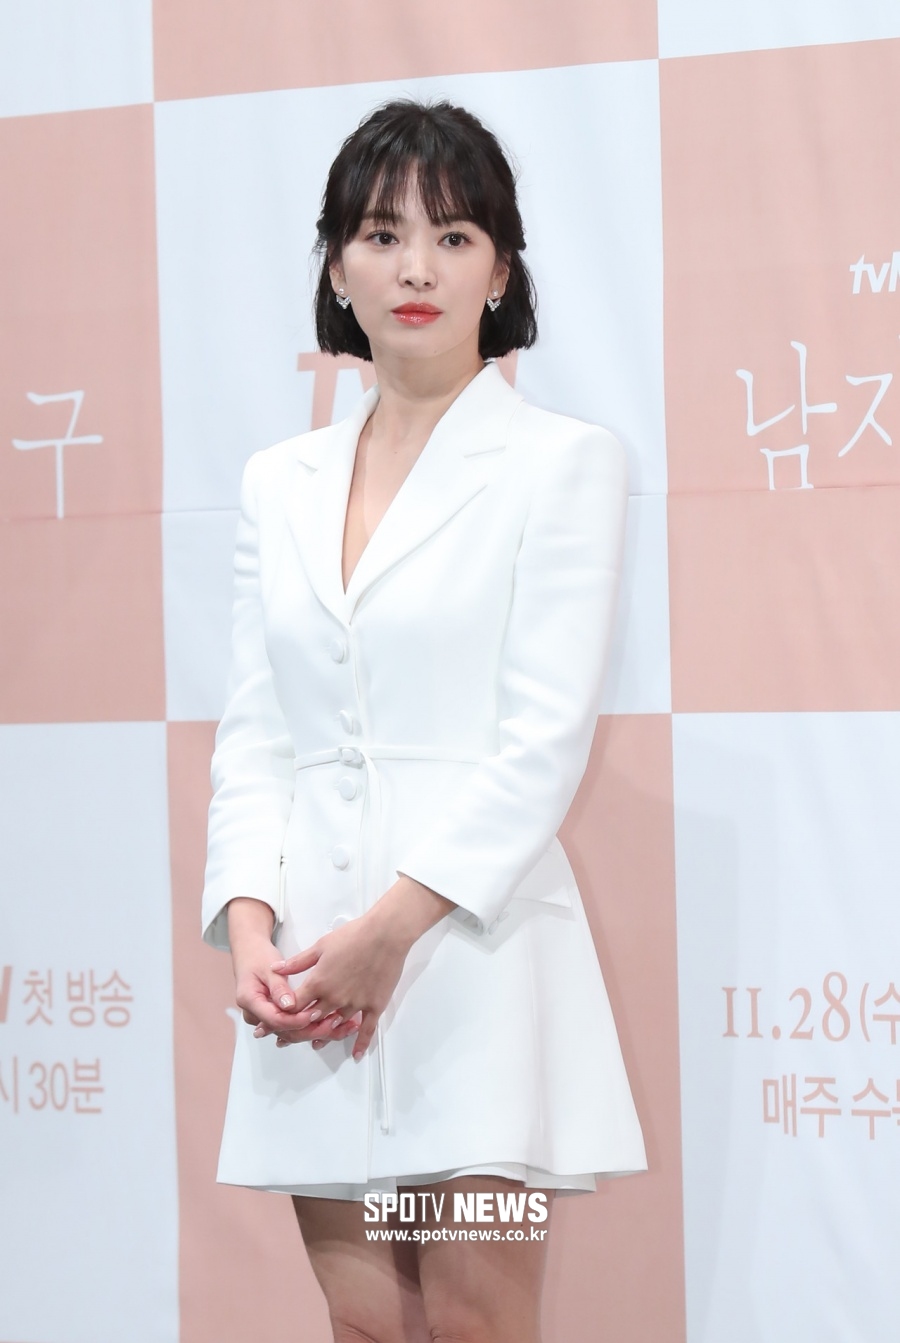 Song Hye-kyo sued police for spreading false rumors and writing malicious comments (vile).On July 25, we filed a complaint with the Bundang Police Station against a number of people who were clearly accused of defamation and insulting false facts, said Song Hye-kyo agency UAA.Song Hye-kyo said, We have filed a complaint with the Bundang Police Station for the first time with a large number of distributors who have completed the collection of evidence on Bad Police activities, clear false facts, and malicious slander and abuse in relation to Song Hye-kyo. We will proceed with the selective complaint, he said.Song Hye-kyo, who appointed Kim & Changs law firm as a legal representative, has been preparing legal action since the end of June and filed a complaint with the police on the 25th.Song Hye-kyo said, We will respond hard without any agreement or agreement regarding the receipt of the complaint.We will continue to pursue the legal action in the second round of the action, he said. We are continuing to falsify and spread false false statements and malicious words, and things that can not be imagined, and this is not only a social Yong-In level, but also an unbearable pain for the party. He stressed.In the future, we will continue to strongly respond to the act of mass production and spread of rumors through indiscrimination by exploiting anonymity, and we hope that this will prevent people from hurting and suffering by writing anymore.The following is the official position of Song Hye-kyo.Good morning, UAA.Actor Song Hye-kyos agency UAA filed a complaint with the Bundang Police Station on July 25, 2019, against a number of people whose allegations were clearly revealed for false defamation and insult.The UAA filed a complaint with the Bundang Police Department first, with regard to Actor Song Hye-kyo, a number of distributors who have completed the collection of evidence for Bad Police acts, clear dissemination of false facts, and malicious blatant slander and abuse.We will also file a Detective complaint against all of the remaining community, comments, and YouTubers as soon as evidence is obtained.The UAA has appointed Kim & Changs law office as a legal representative on June 28 and has been preparing for legal action.In addition, we will respond hard without any agreement or agreement regarding the receipt of the complaint.Following this measure, we will continue to proceed without agreement in the ongoing legal response.There is a continuing act of fabricating and spreading false false writings, malicious abuses, and things that can not be imagined at all, in relation to Actor Song Hye-kyo, which is not only exceeding the social Yong-In level, but also causing unbearable suffering to the parties.In the future, we will continue to strongly respond to the act of exploiting anonymity to mass-produce rumors and spread them, and we hope that this will prevent the act of hurting and suffering people by writing.=